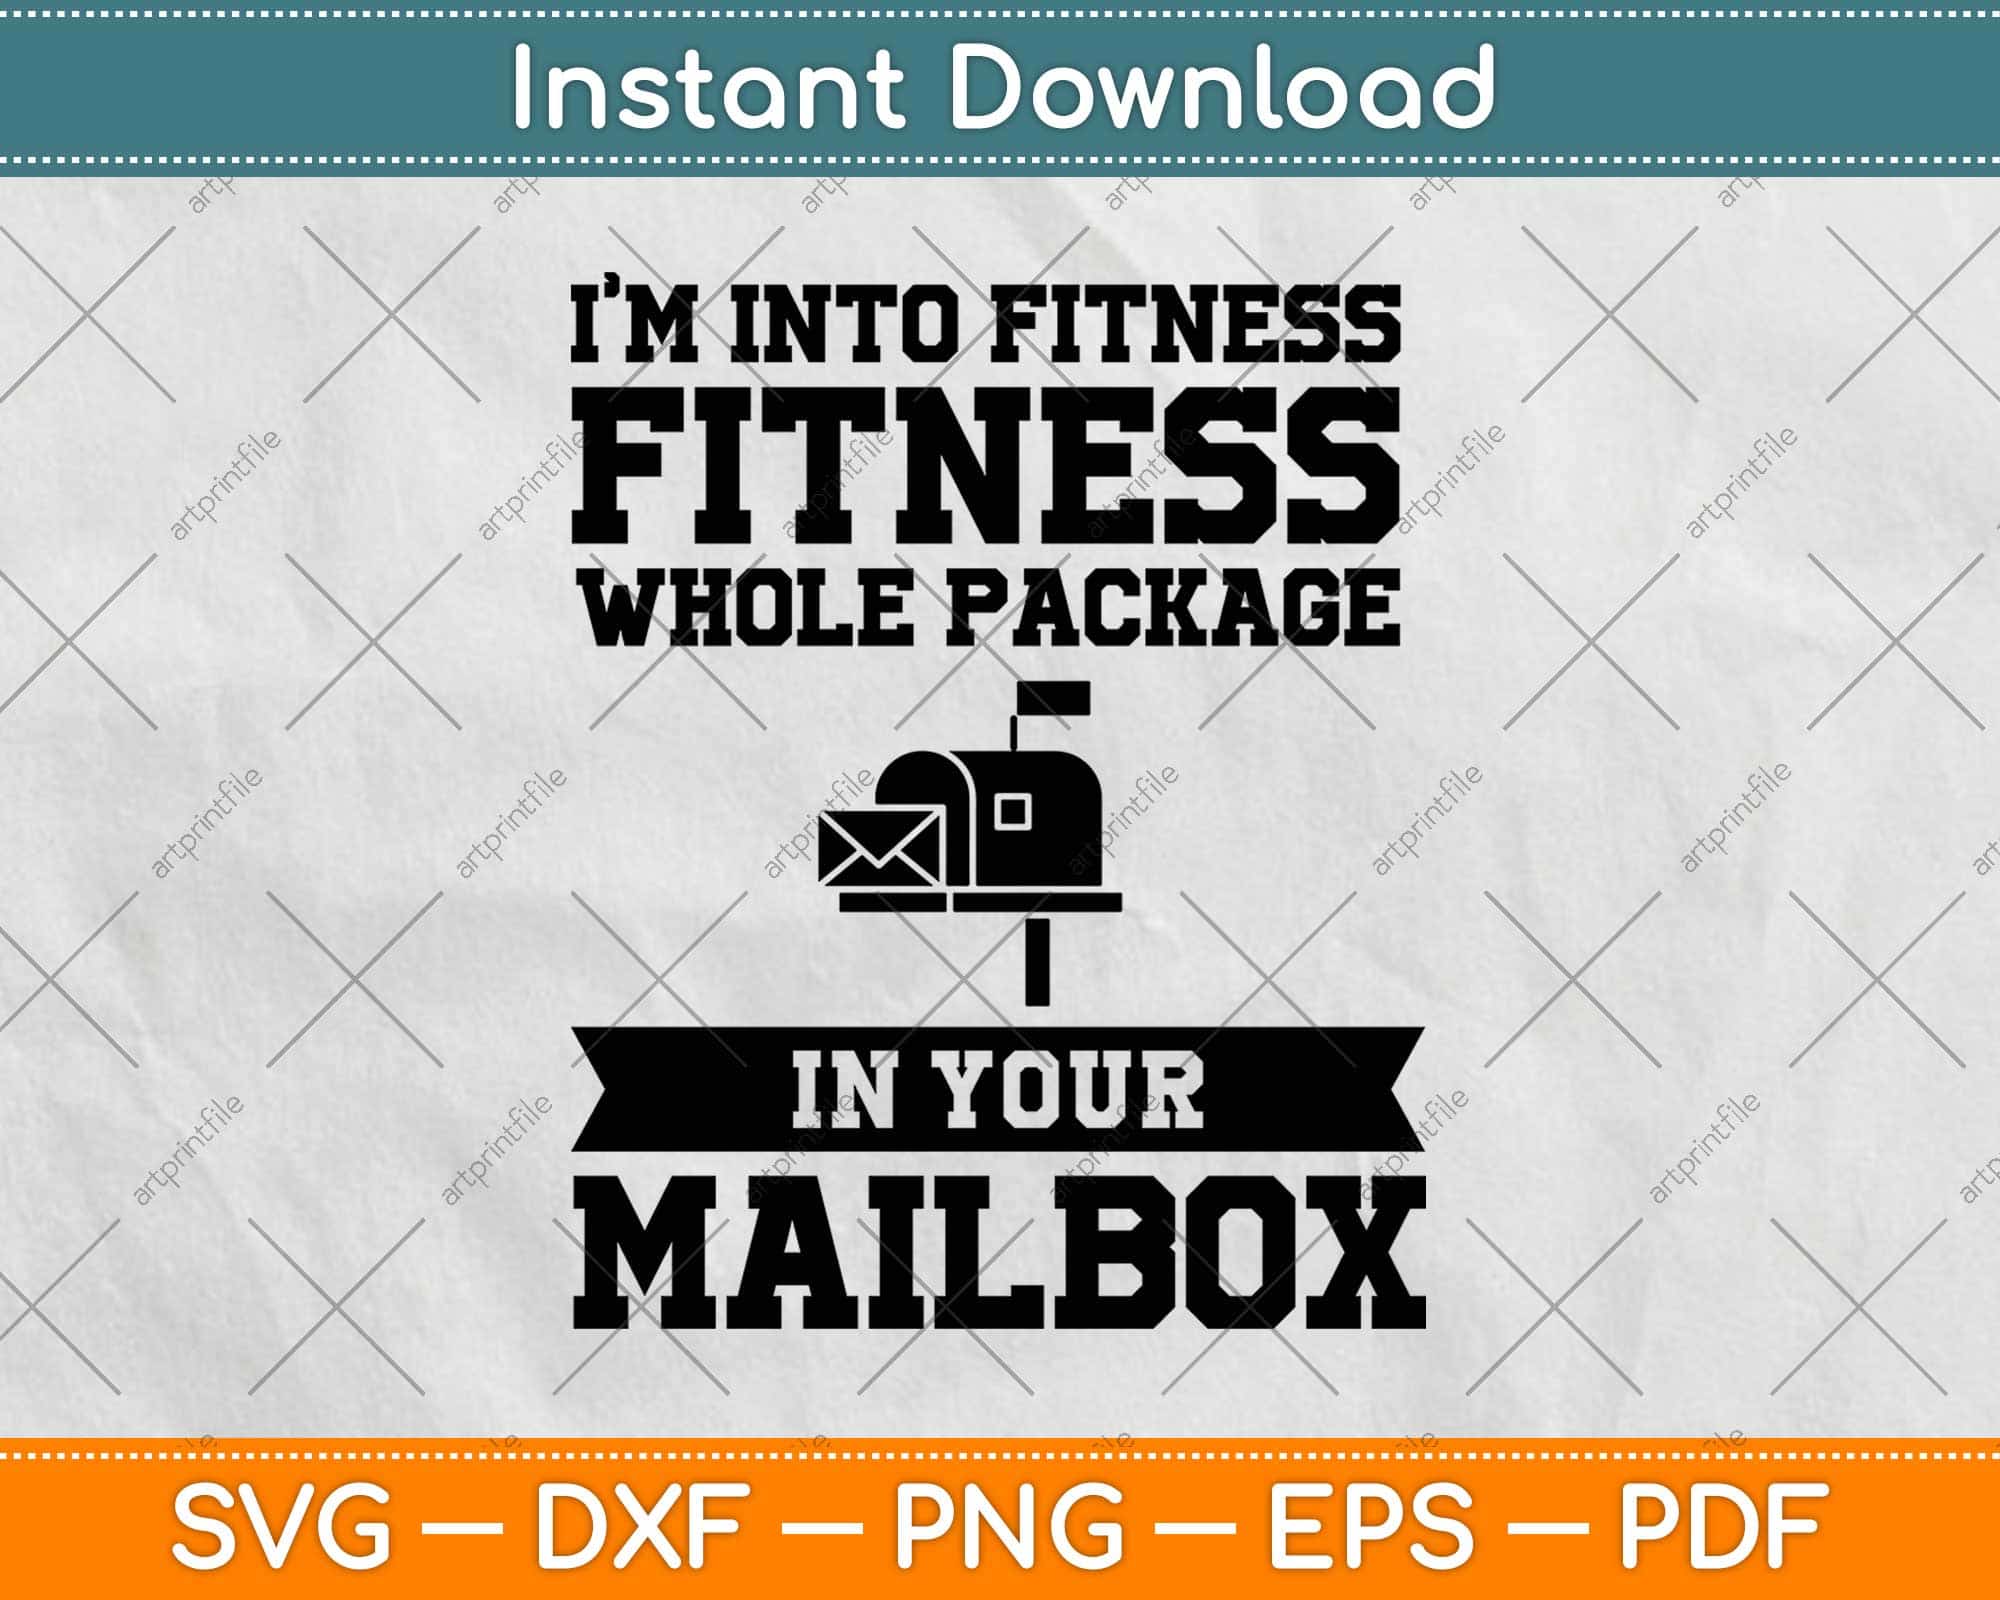 Download I M Into Fitness Whole Package In Your Mailbox Svg Png Dxf Files Artprintfile